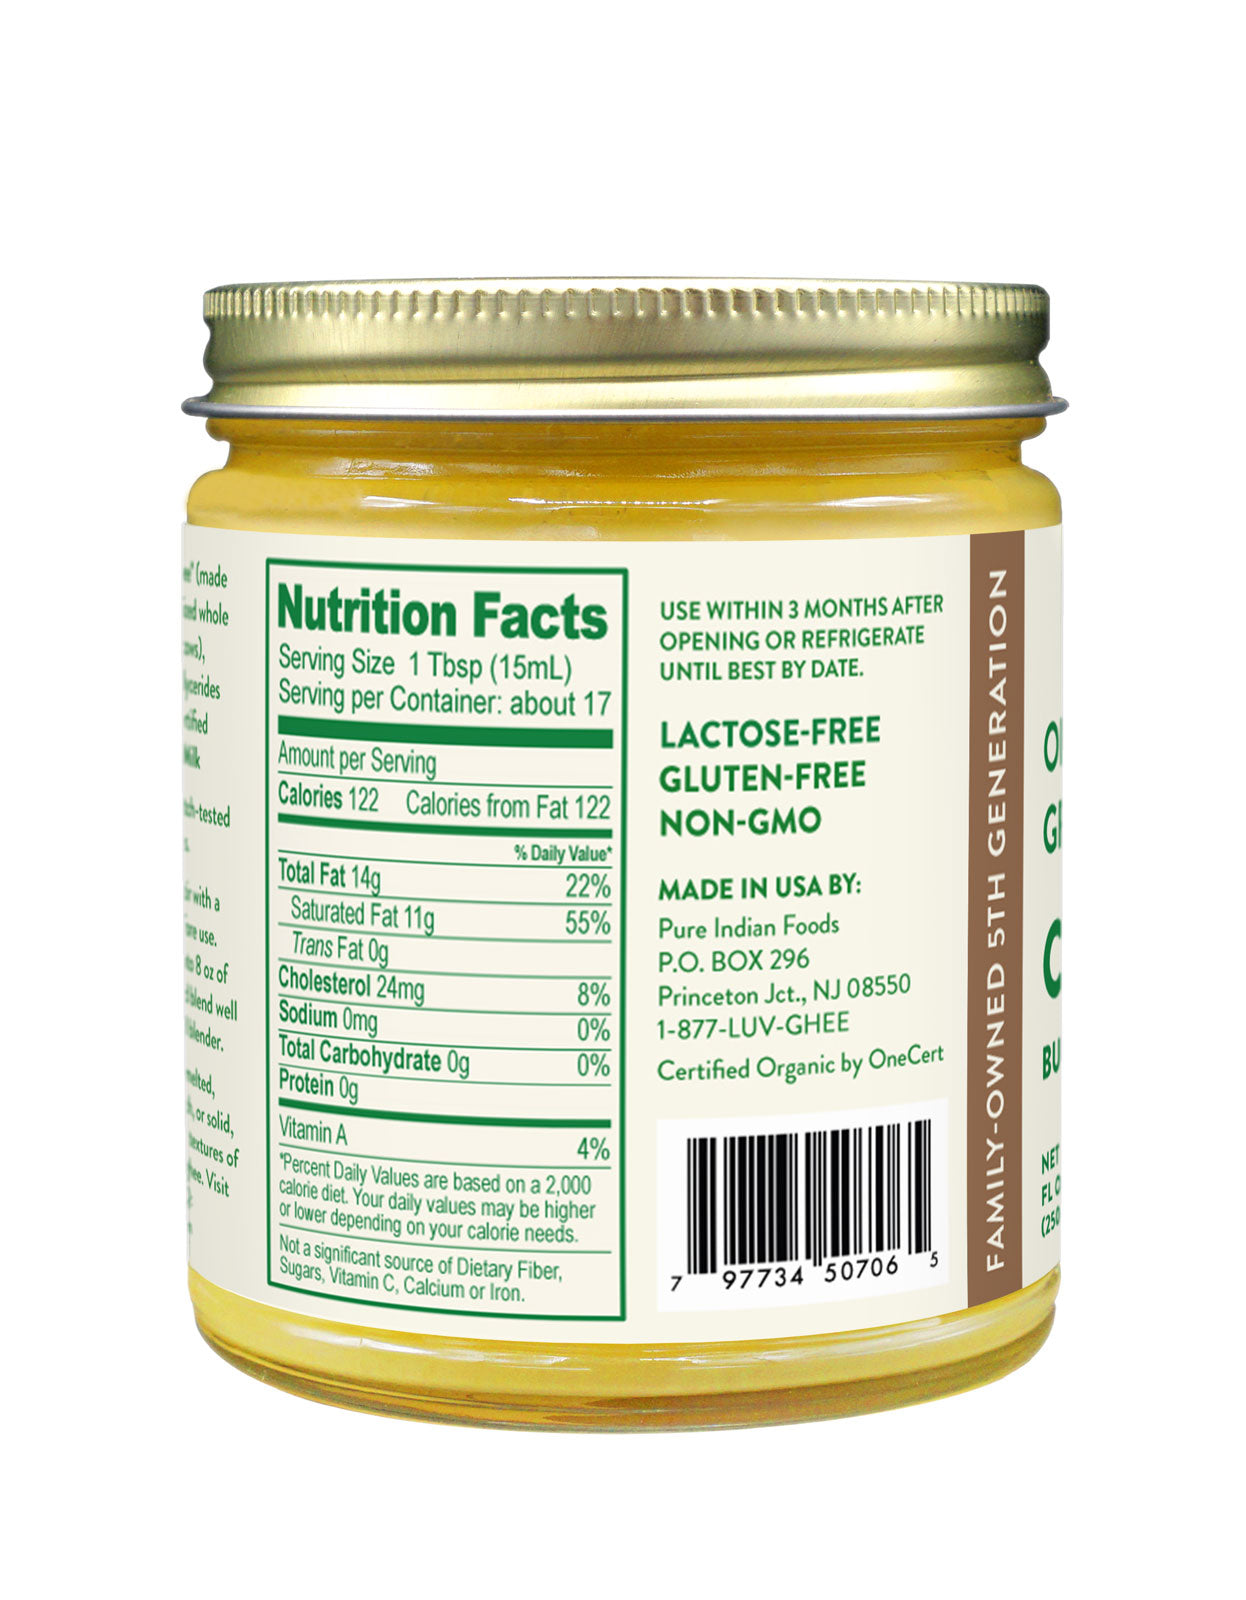 Nutrition Facts Label on a jar of Pure Indian Foods Coffee++, a Paleo coffee creamer that is lactose-free, casein-free, gluten-free, and non-gmo.